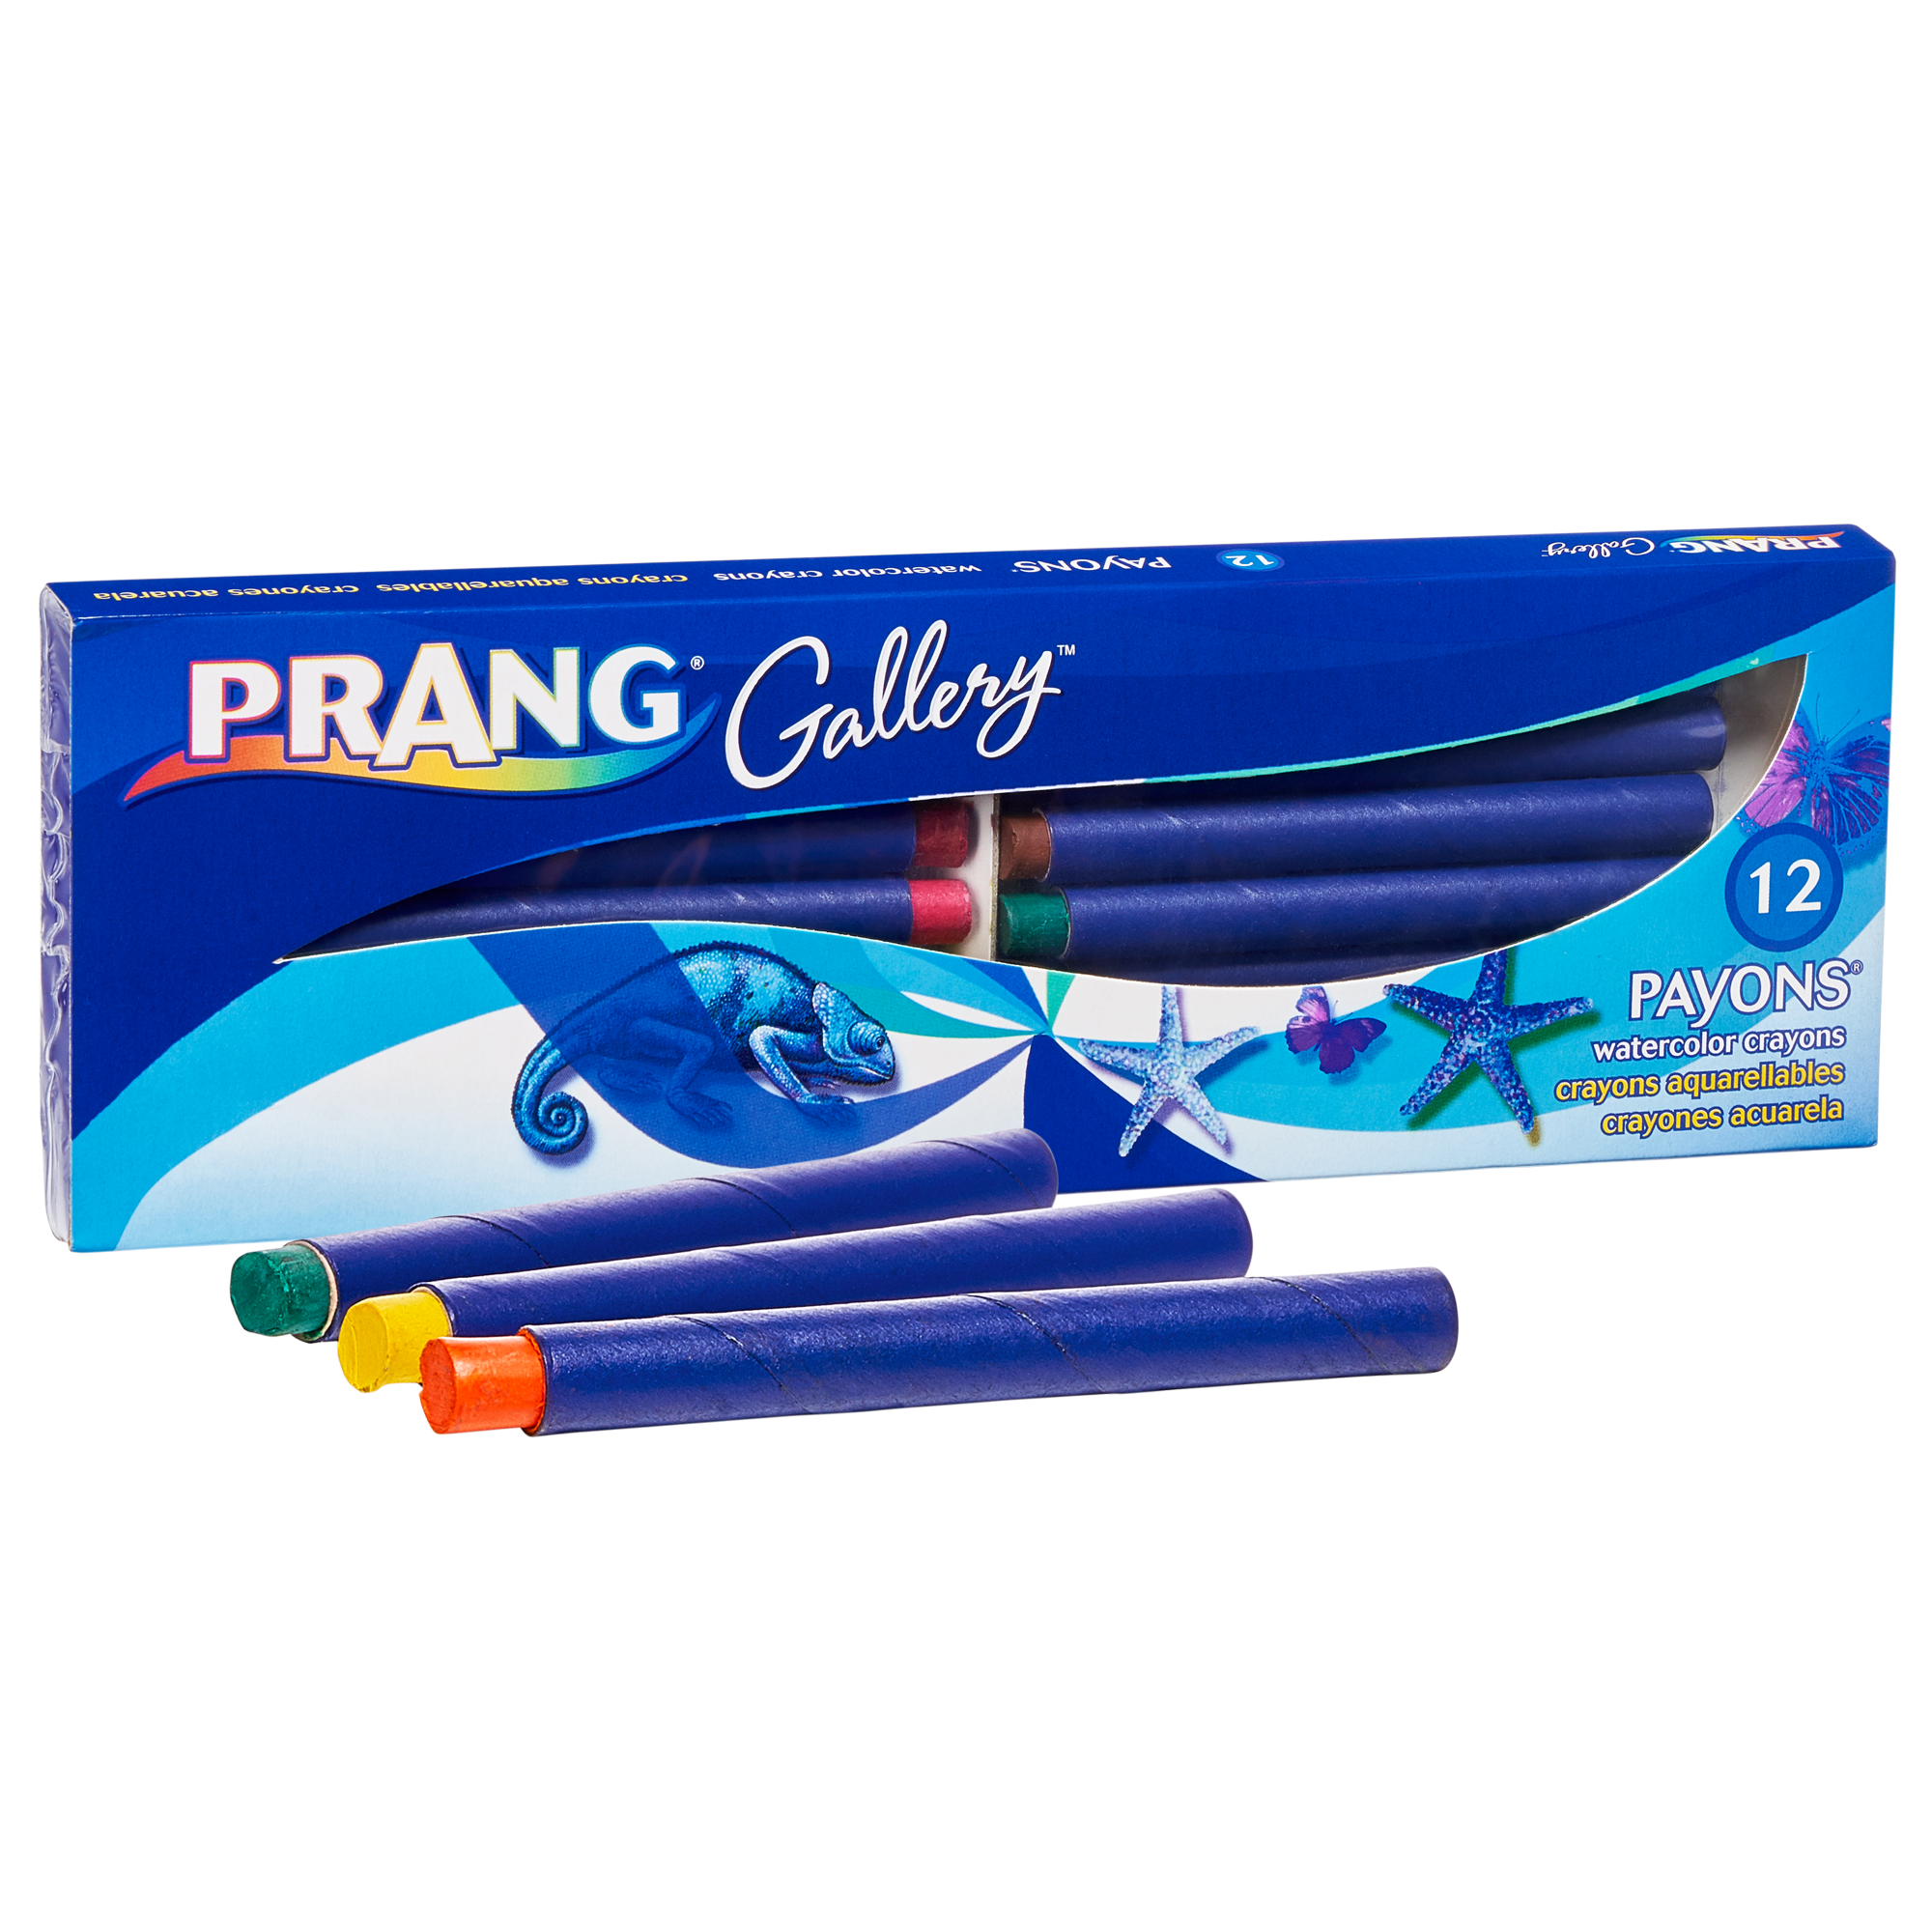 PRANG® WASHABLE READY-TO-USE, PAINT WHITE - Multi access office